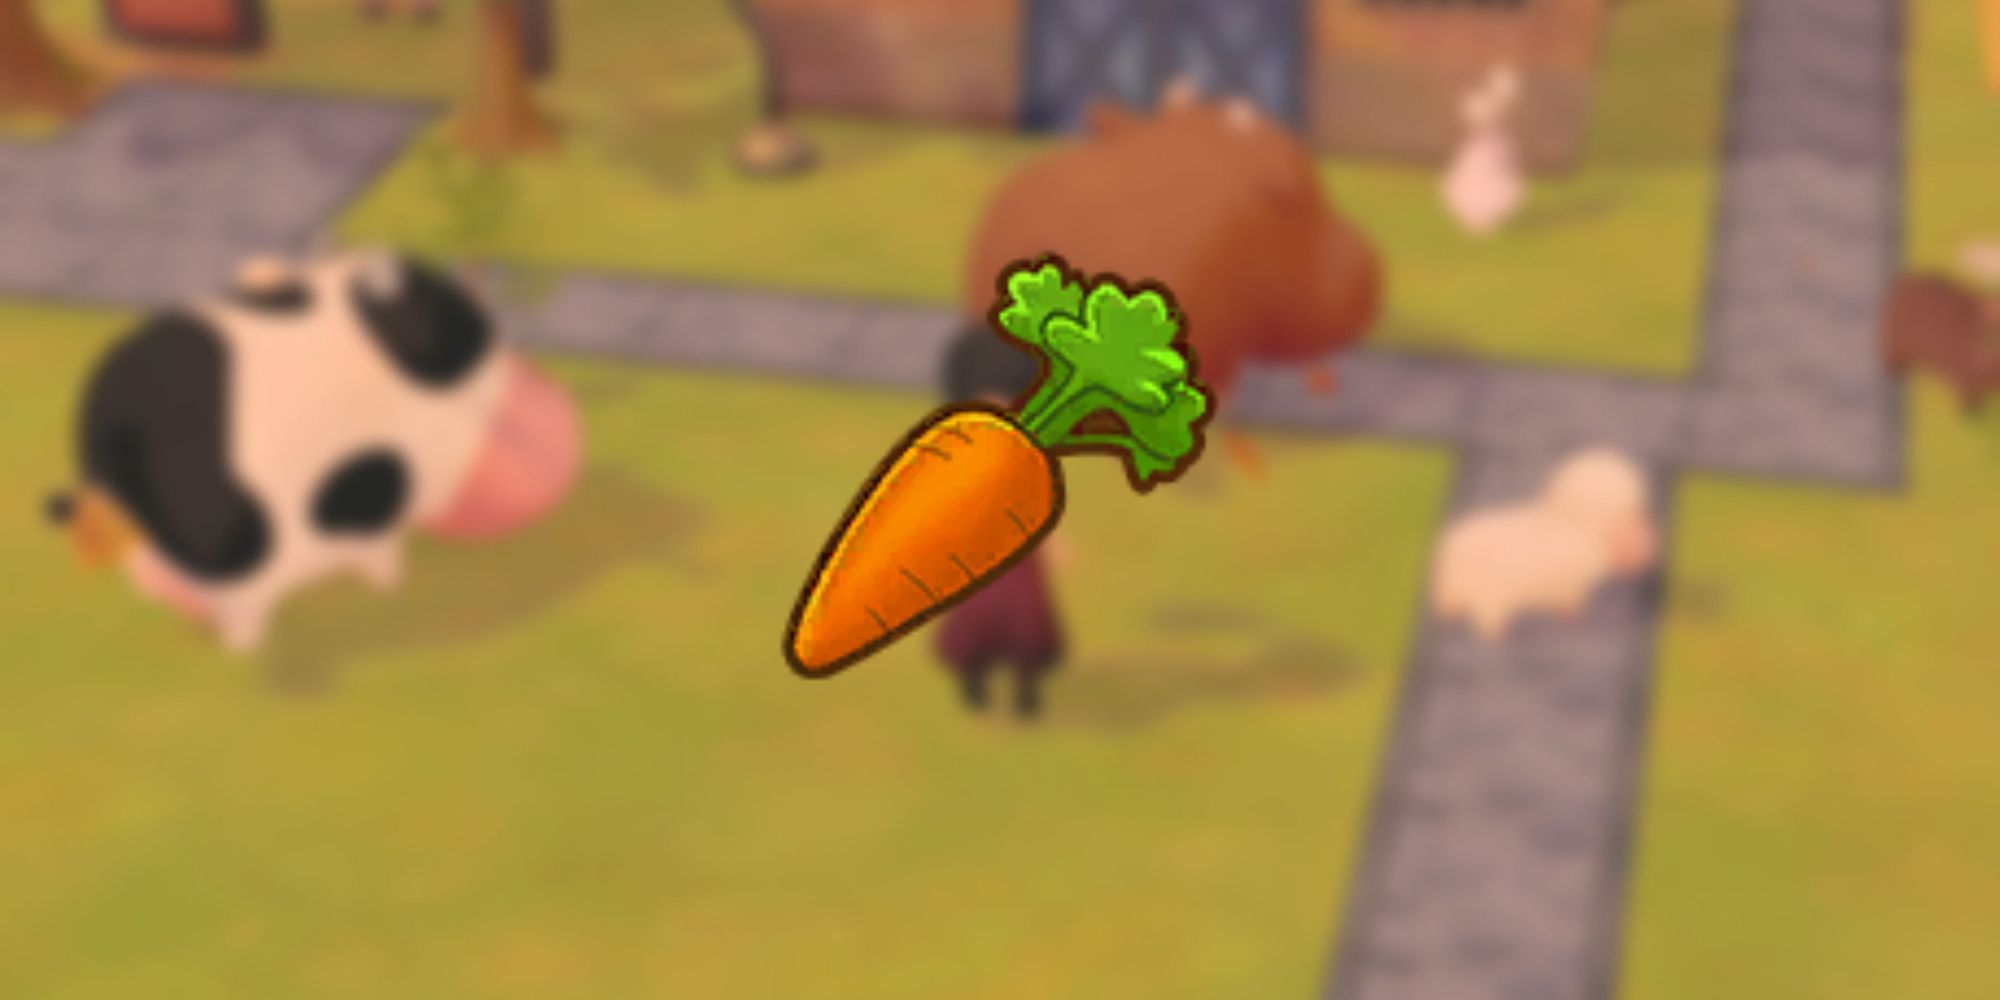 Carrot icon as it would be seen in players inventory over blurred background of player and cows in game